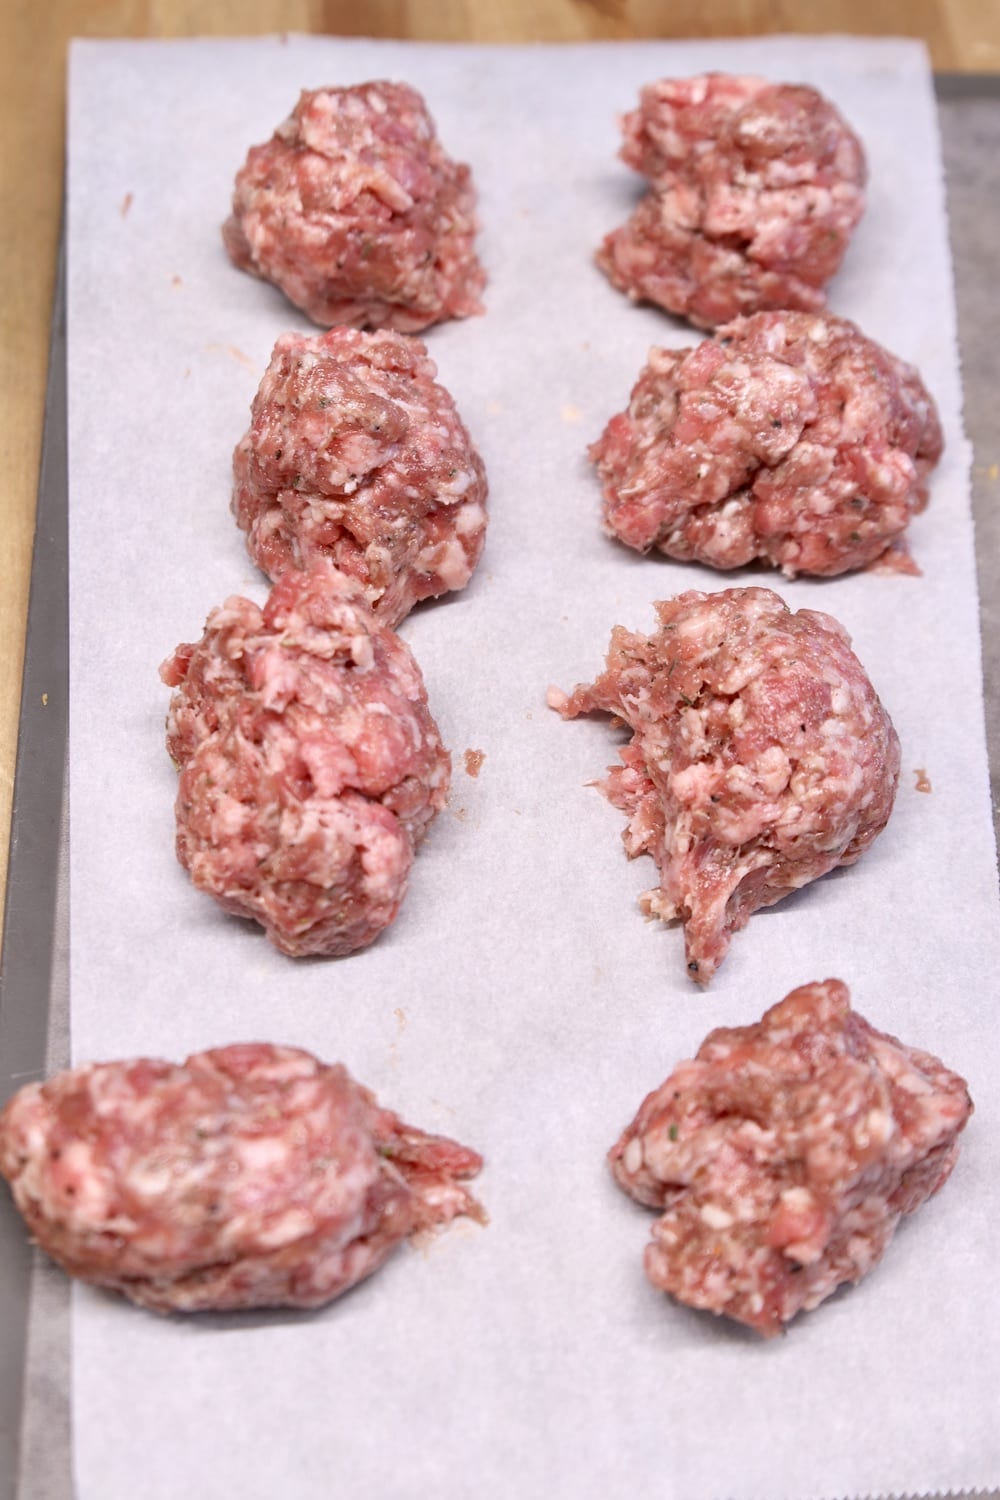 8 portions of ground sausage on parchment paper